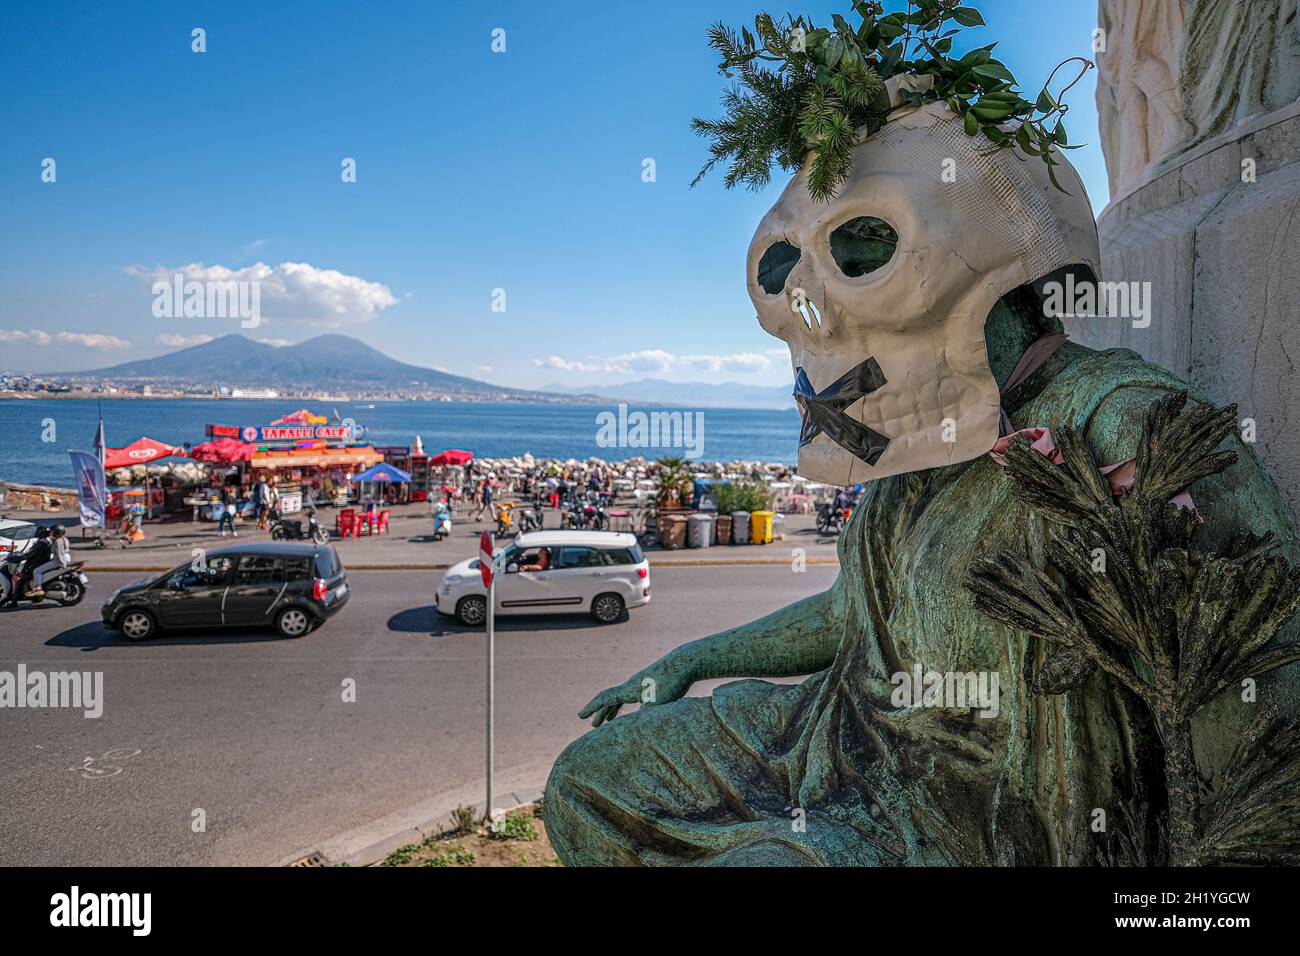 Environmentalist protest in the squares of many Italian cities.The blitz was carried out by members of Extintion Ribellion, during the night, they targeted the statues of the major Italian cities masks depicting a papier-mâché skull with a black 'x' covering the mouth were placed on the monuments in naples Stock Photo